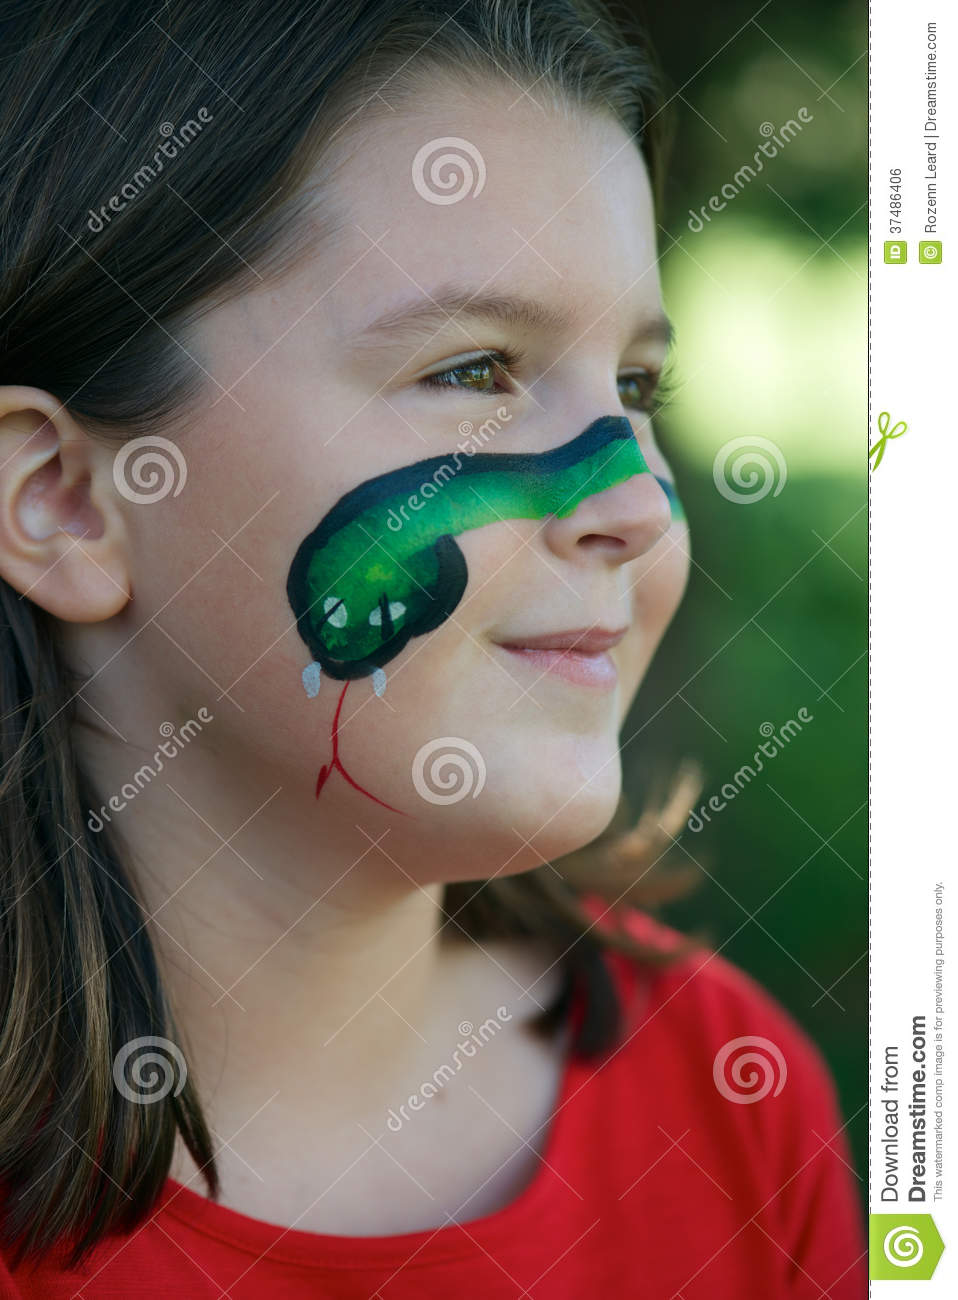 Young Girl With Green Snake Face Painting On Her Cheek